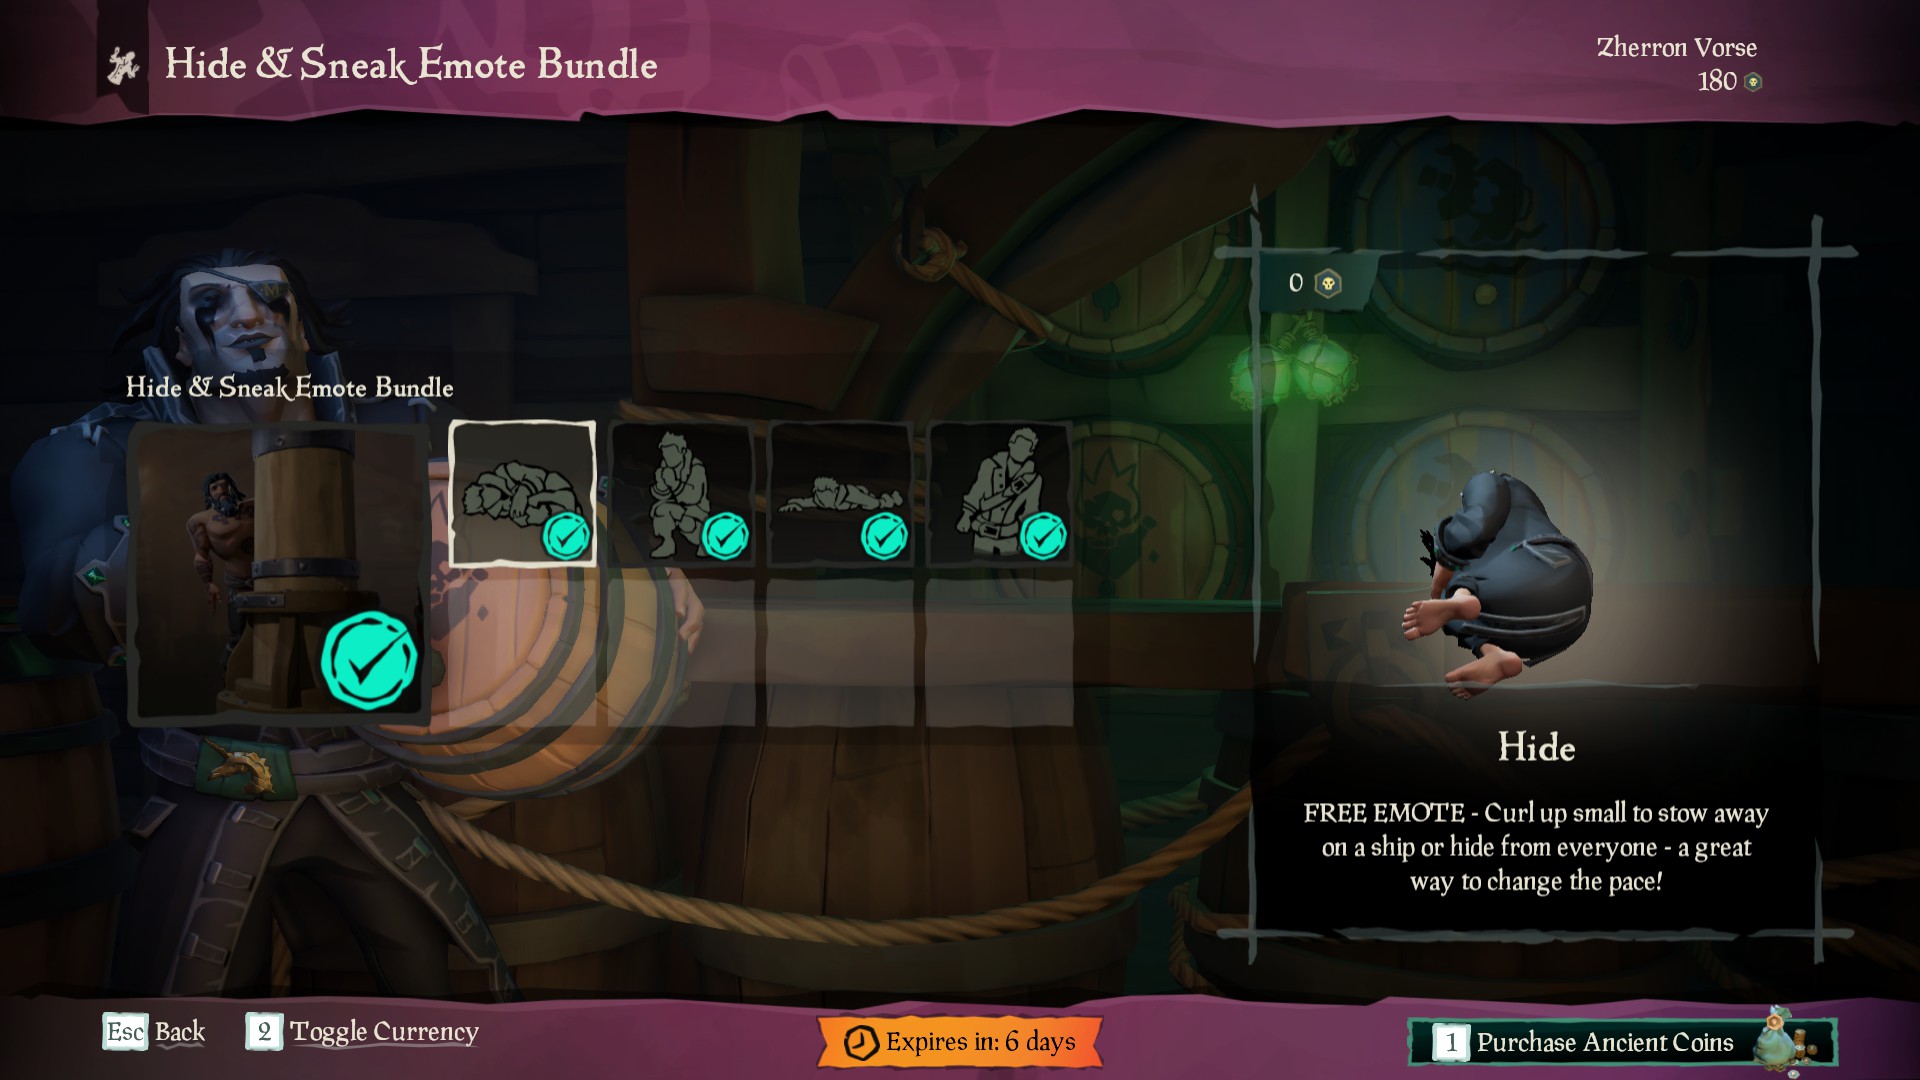 Sea of Thieves Night's Emissary: Stealth Guide